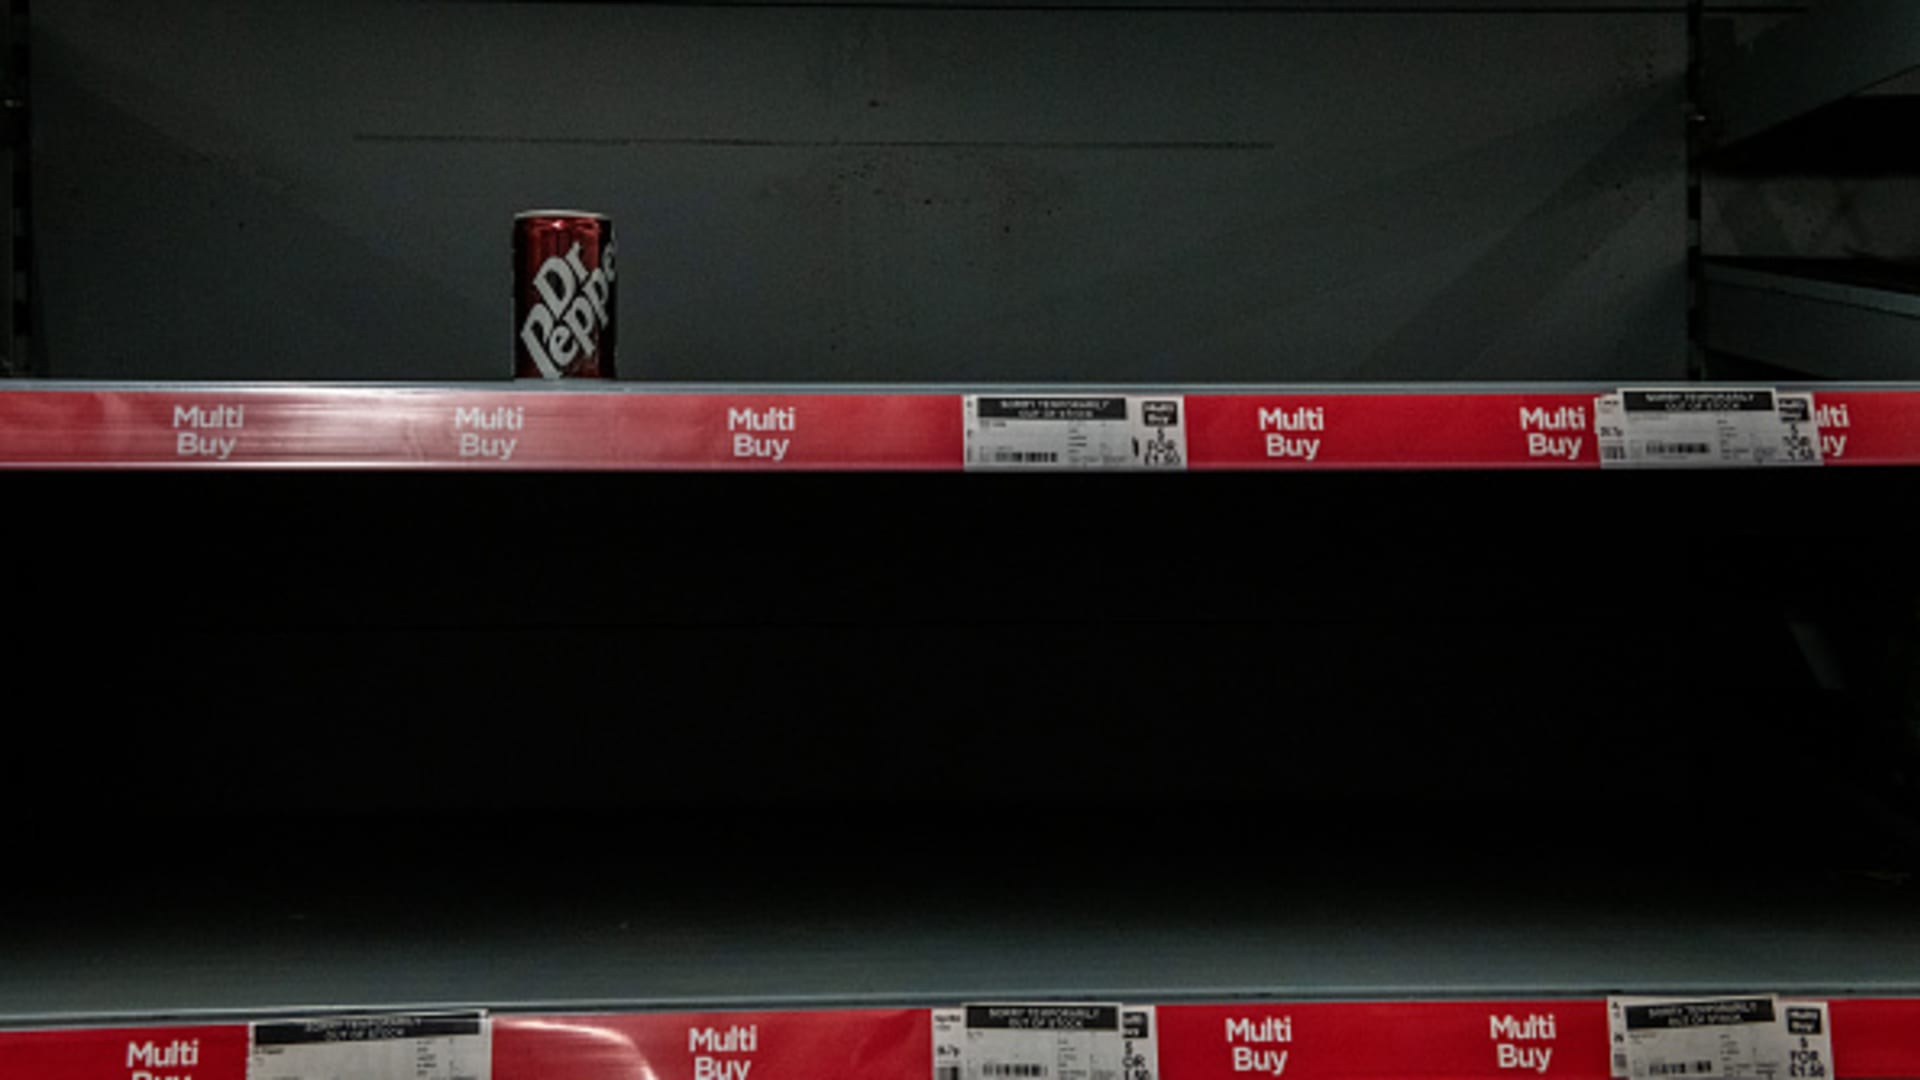 One remaining drink is seen on a near-empty shelf at an Asda supermarket in London, England on September 19, 2021.